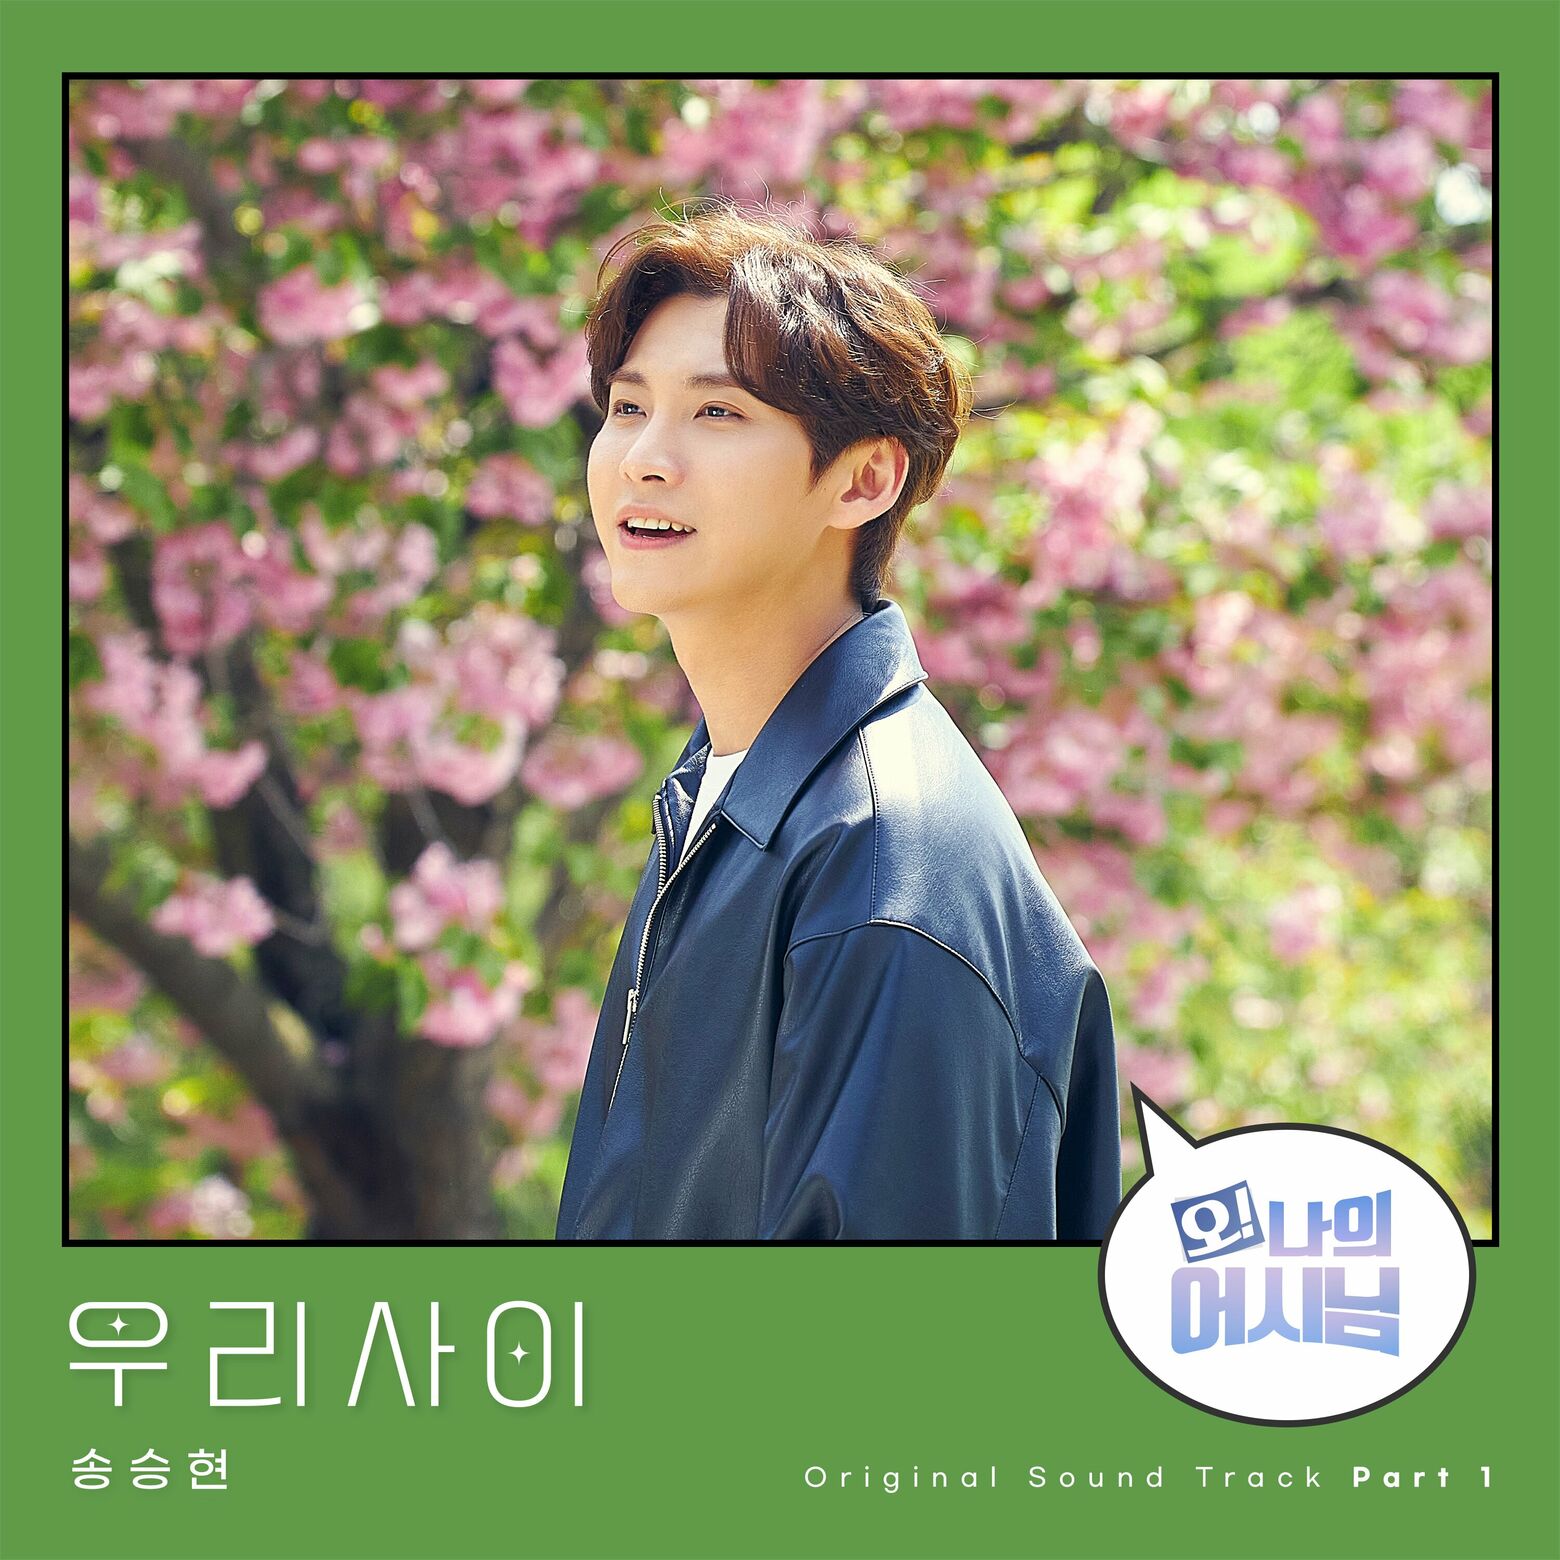 Song Seung Hyun – Oh! My assistant OST Pt. 1